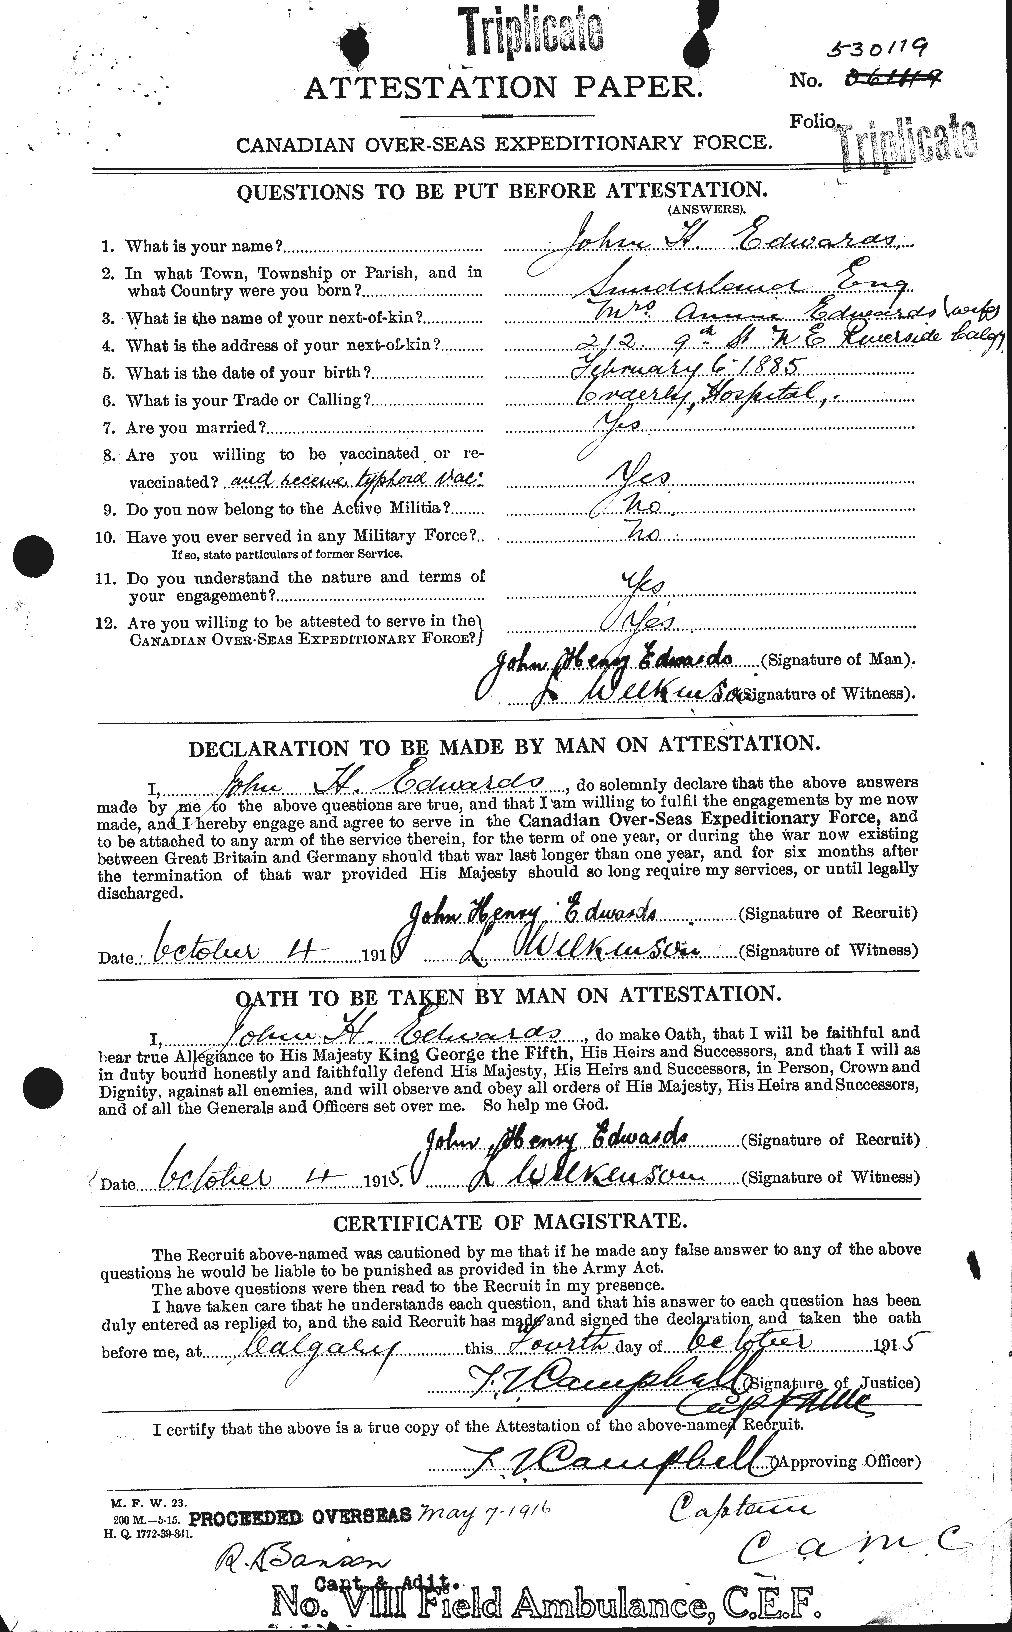 Personnel Records of the First World War - CEF 310135a